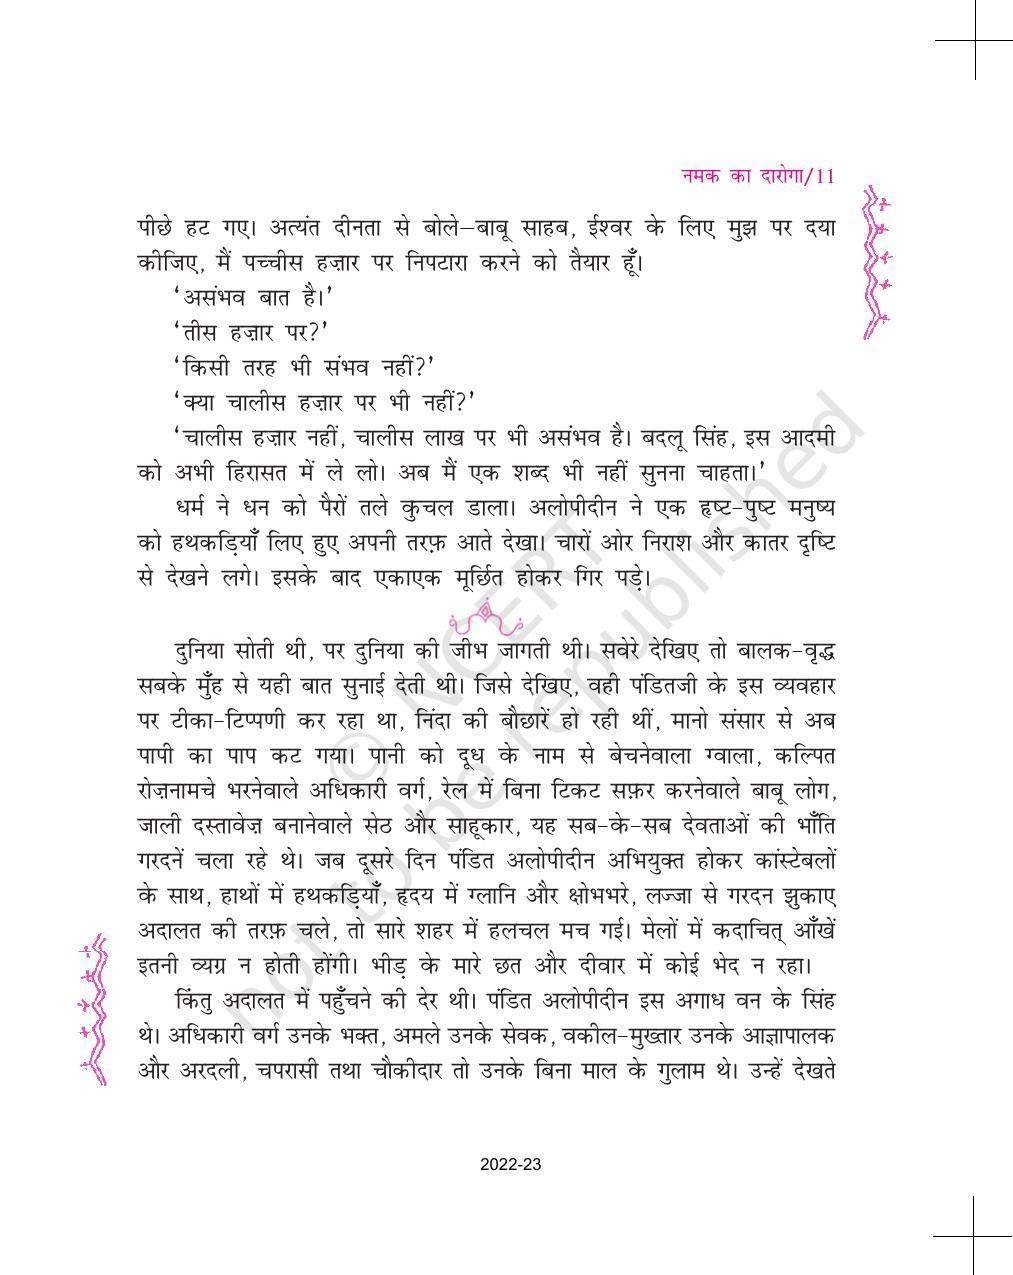 NCERT Book for Class 11 Hindi Aroh Chapter 1 नमक का दारोगा - Page 11